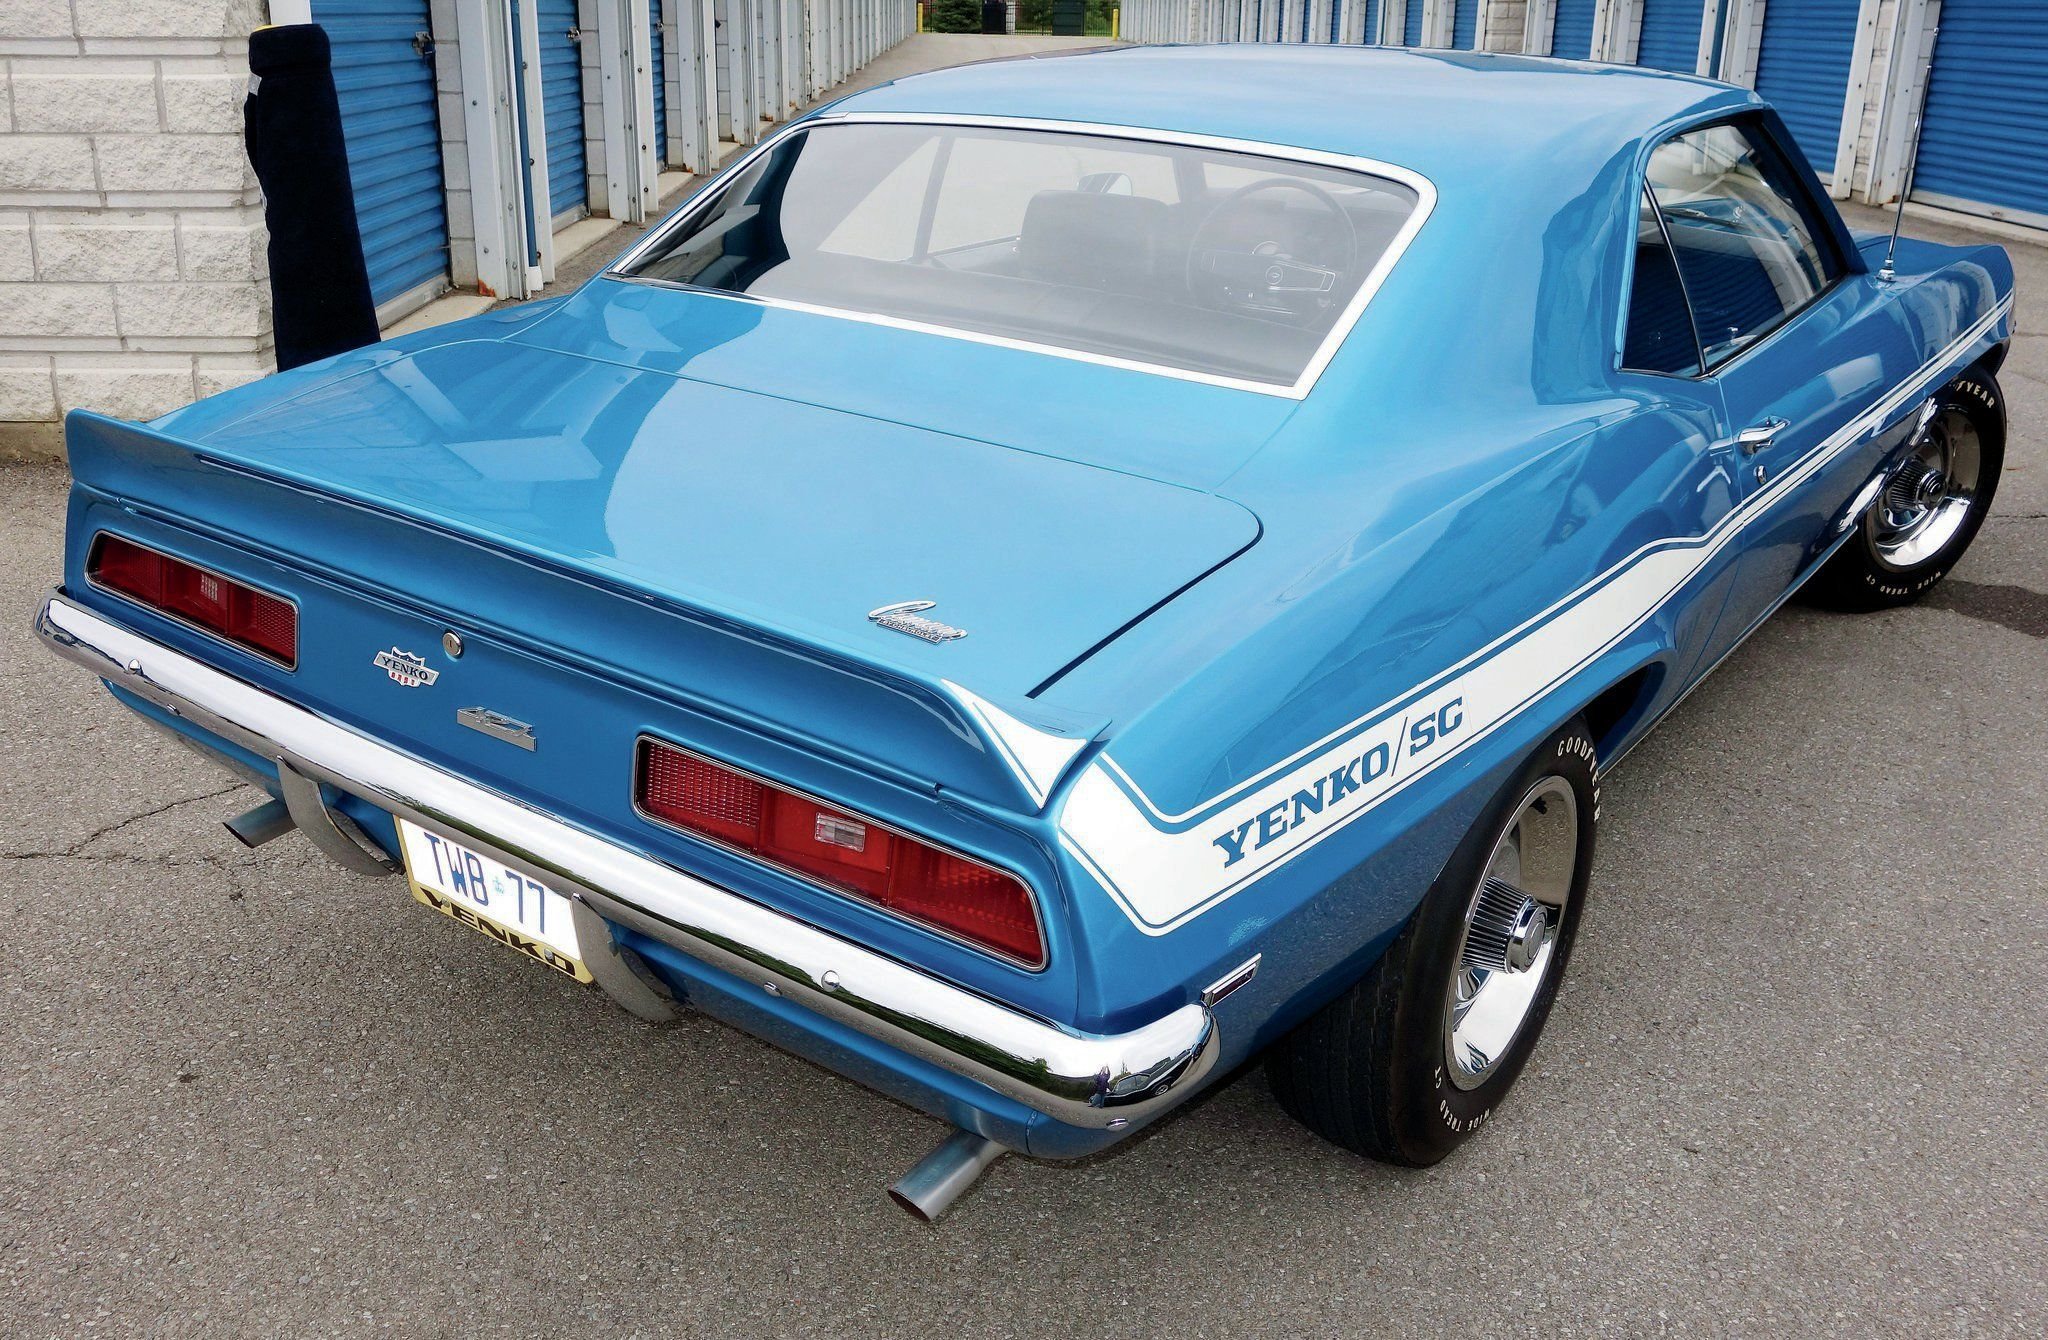 1969, Chevrolet, Yenko, Camaro, Muscle, Clessic, Old, Original, Usa, 07 Wal...